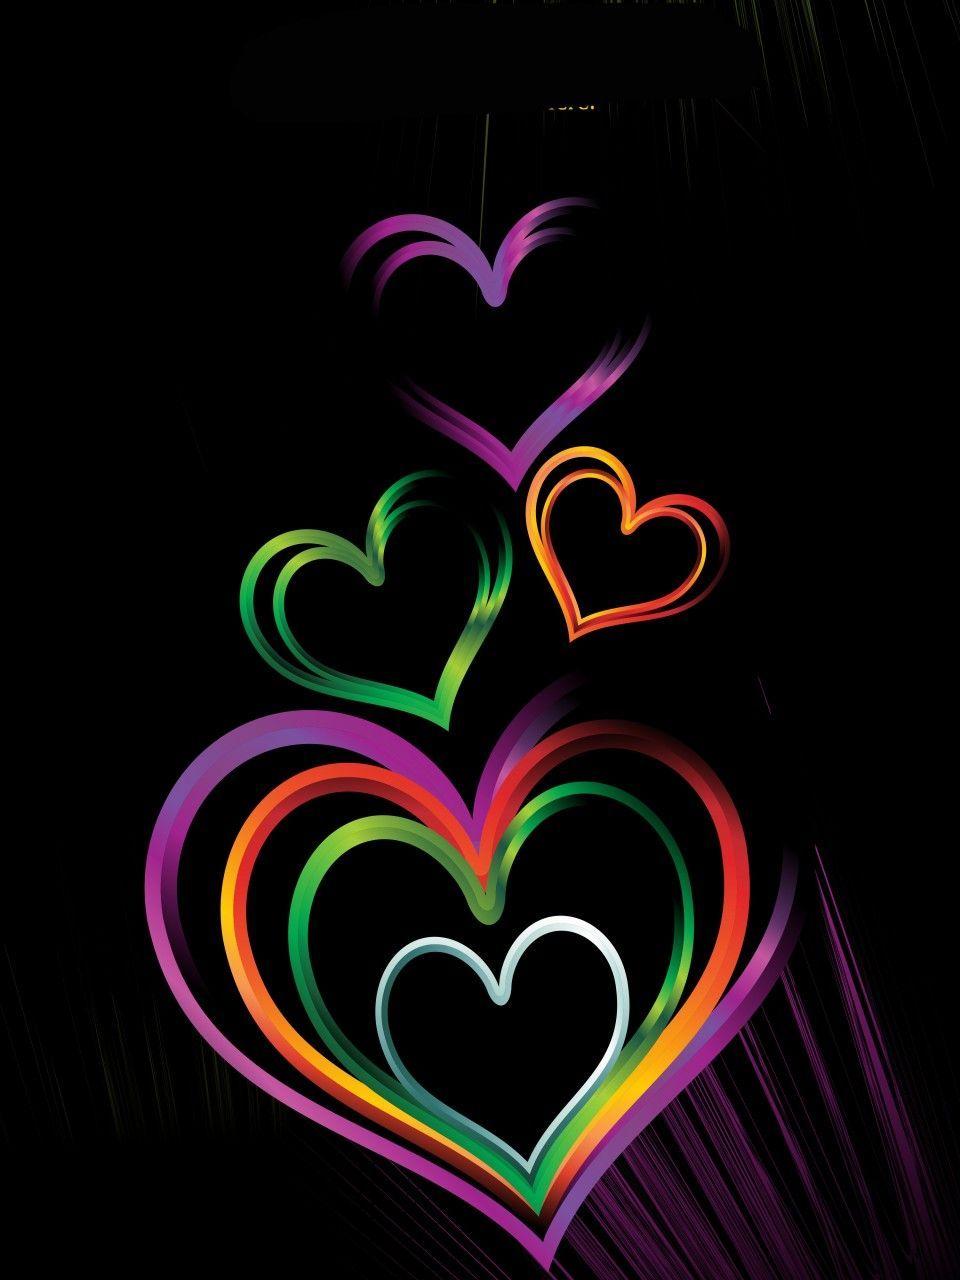 Colorful Heart Background. Colorful Heart on Black Background B